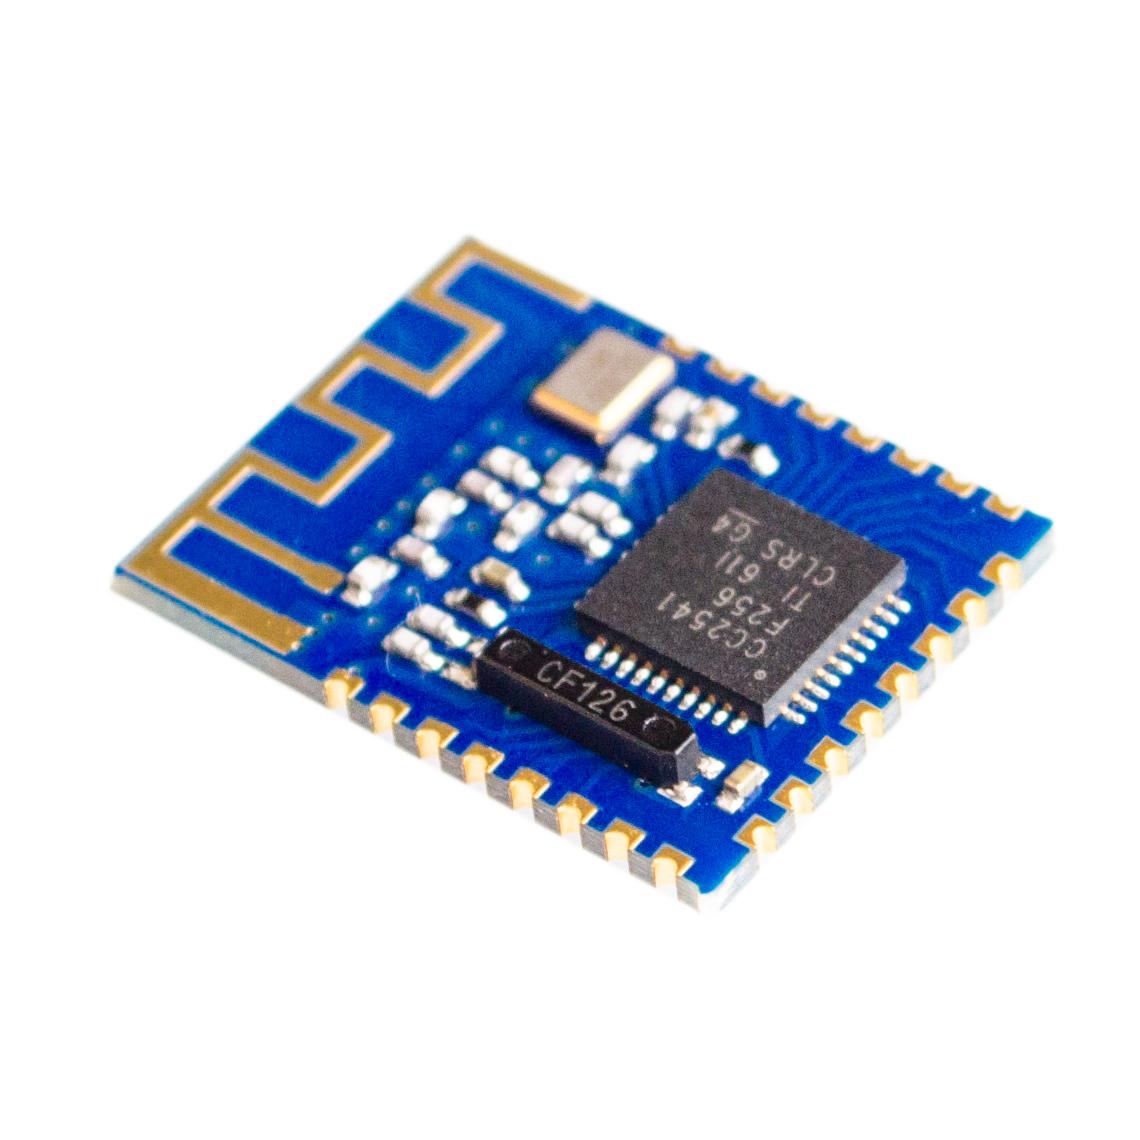 JDY-08 BLE Bluetooth 4.0 Uart Transceiver Module CC2541 Central Switching Wireless Module iBeacon